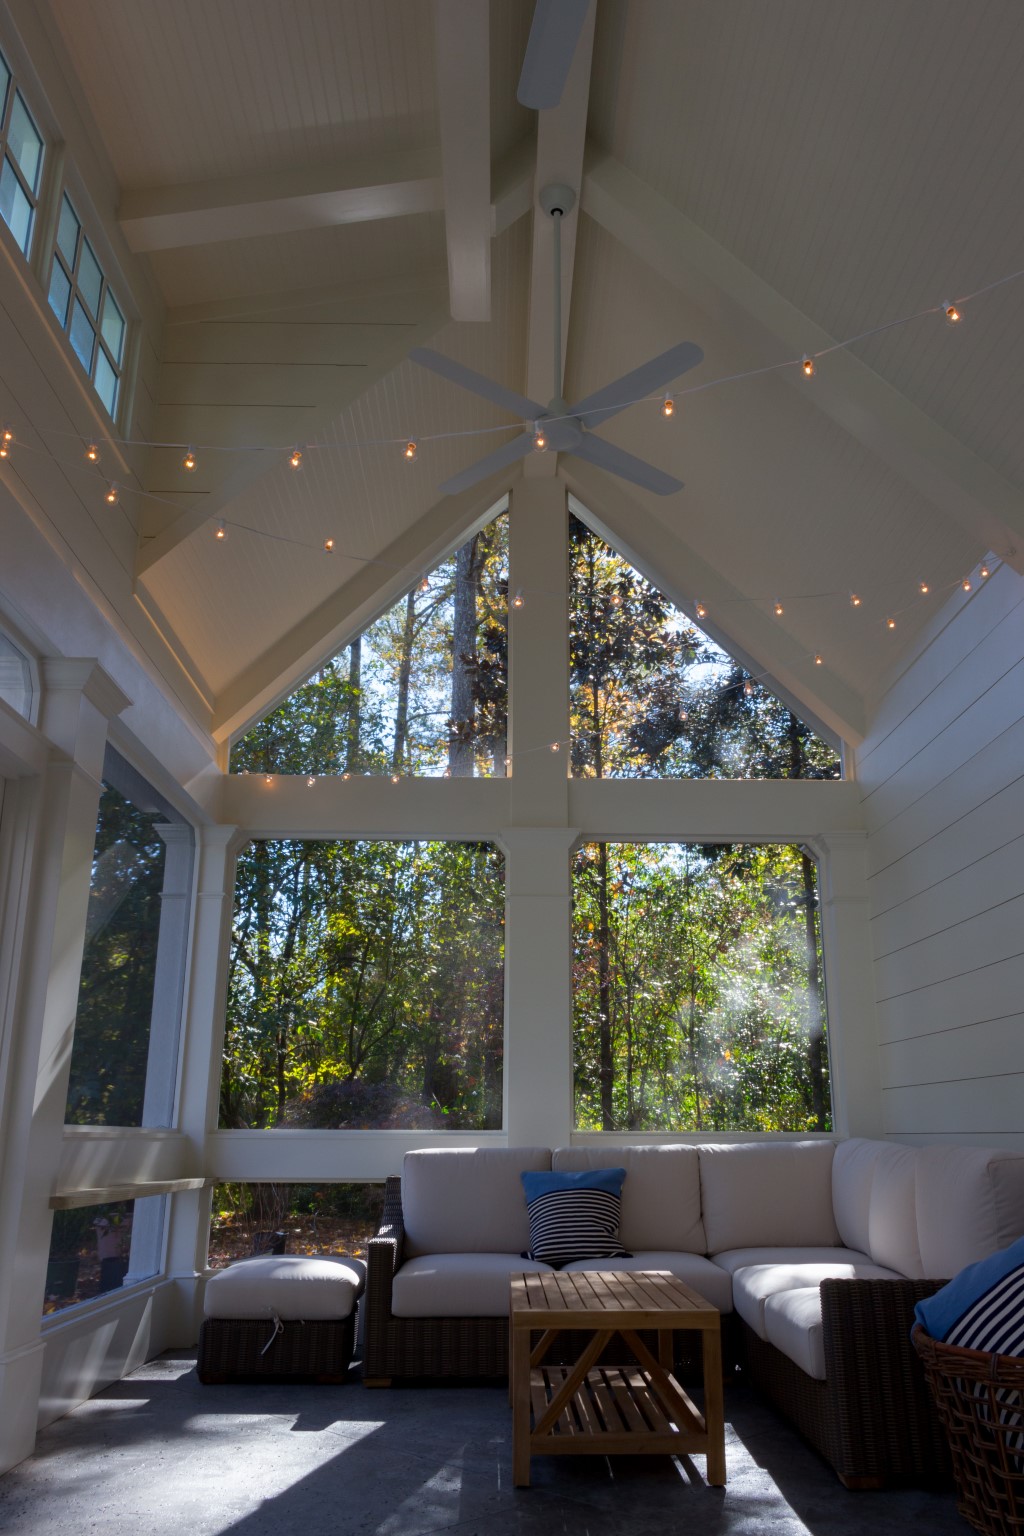 The inside of a small pool house with large windows, string lights, and furniture